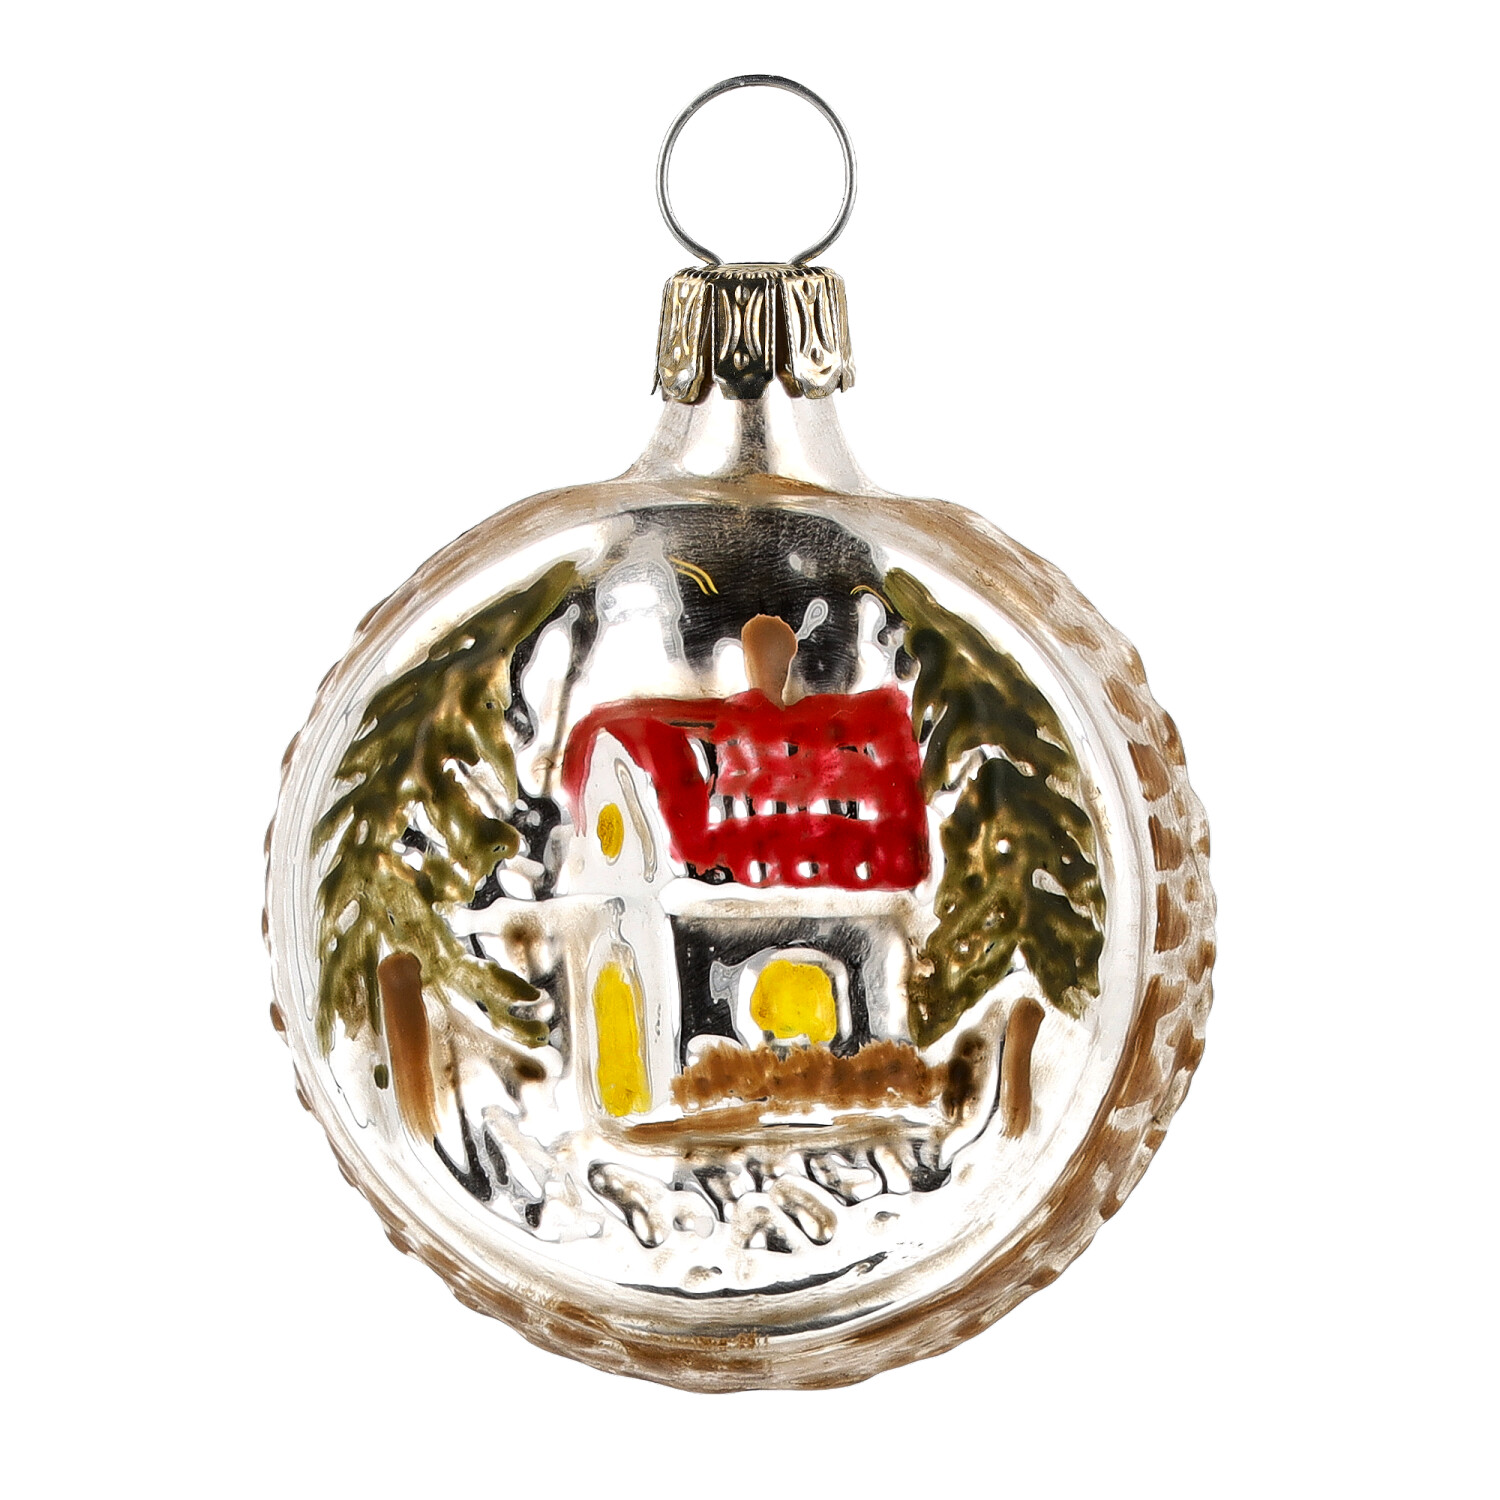 Retro Vintage style Christmas Glass Ornament - Ball with house